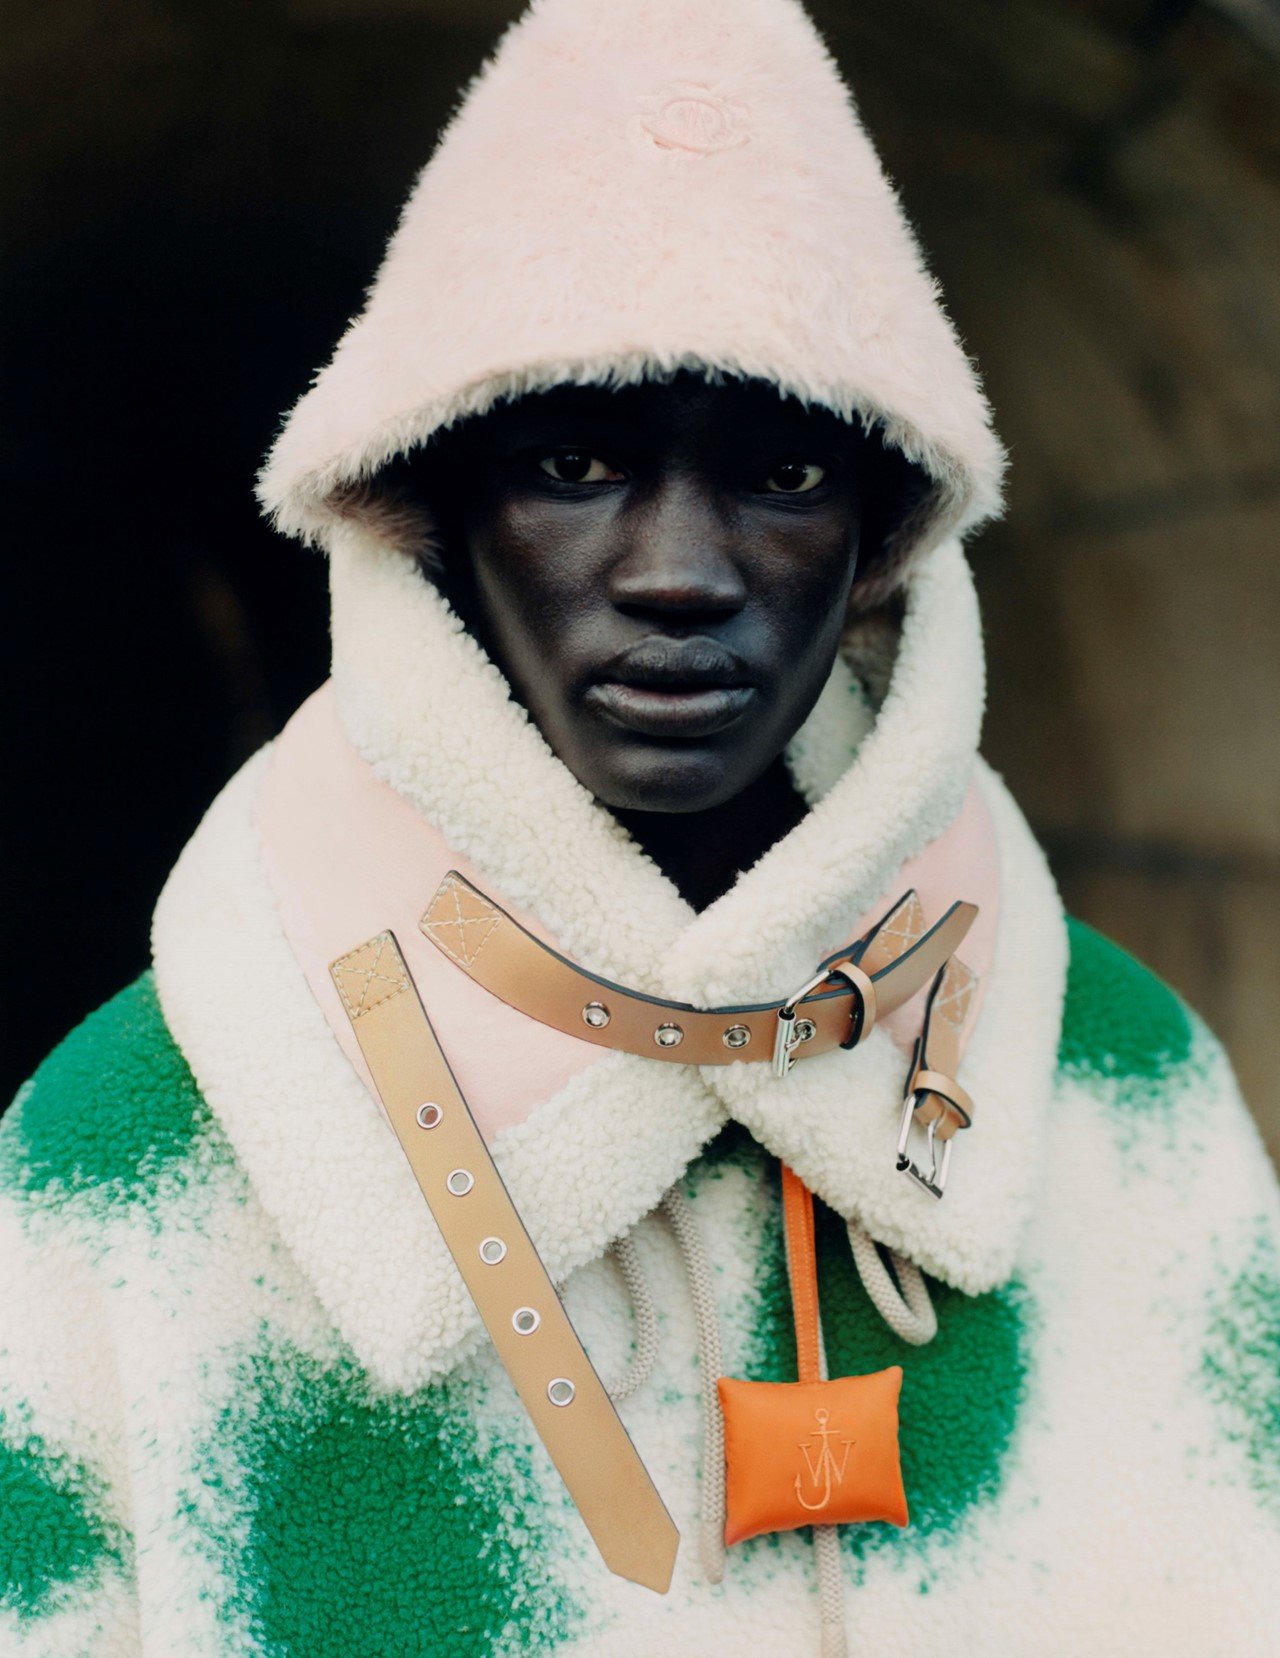 1-Moncler-JW-Anderson-by-Tyler-Mitchell (4).jpeg